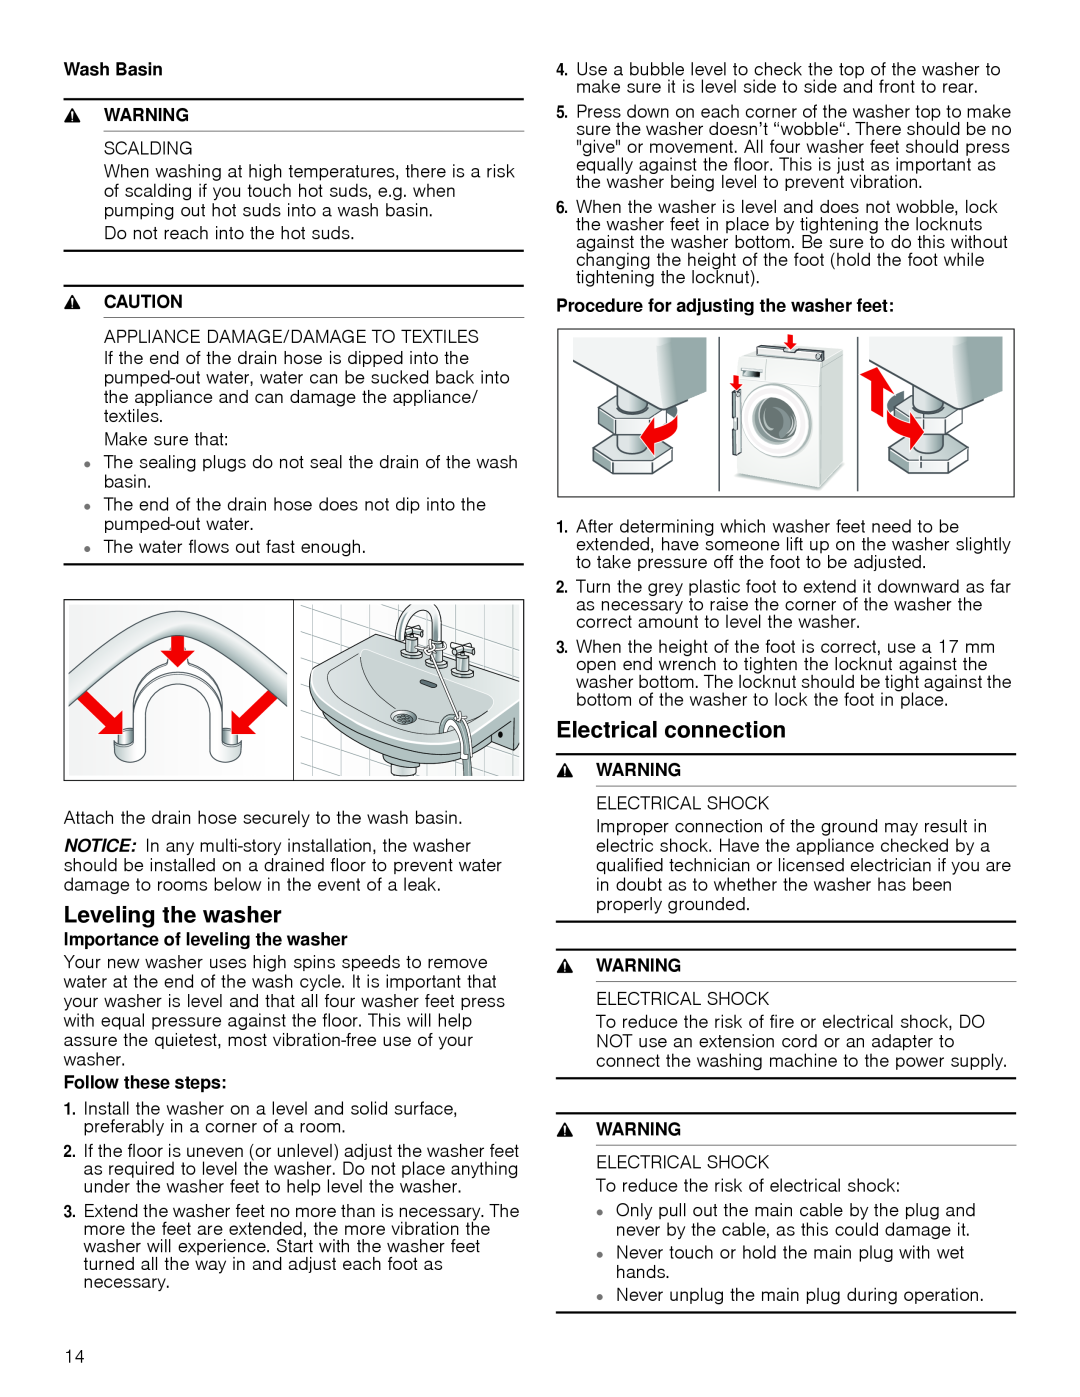 Bosch Appliances WAP24201UC Leveling the washer, Electrical connection, Wash Basin 9 WARNING, Follow these steps, Caution 